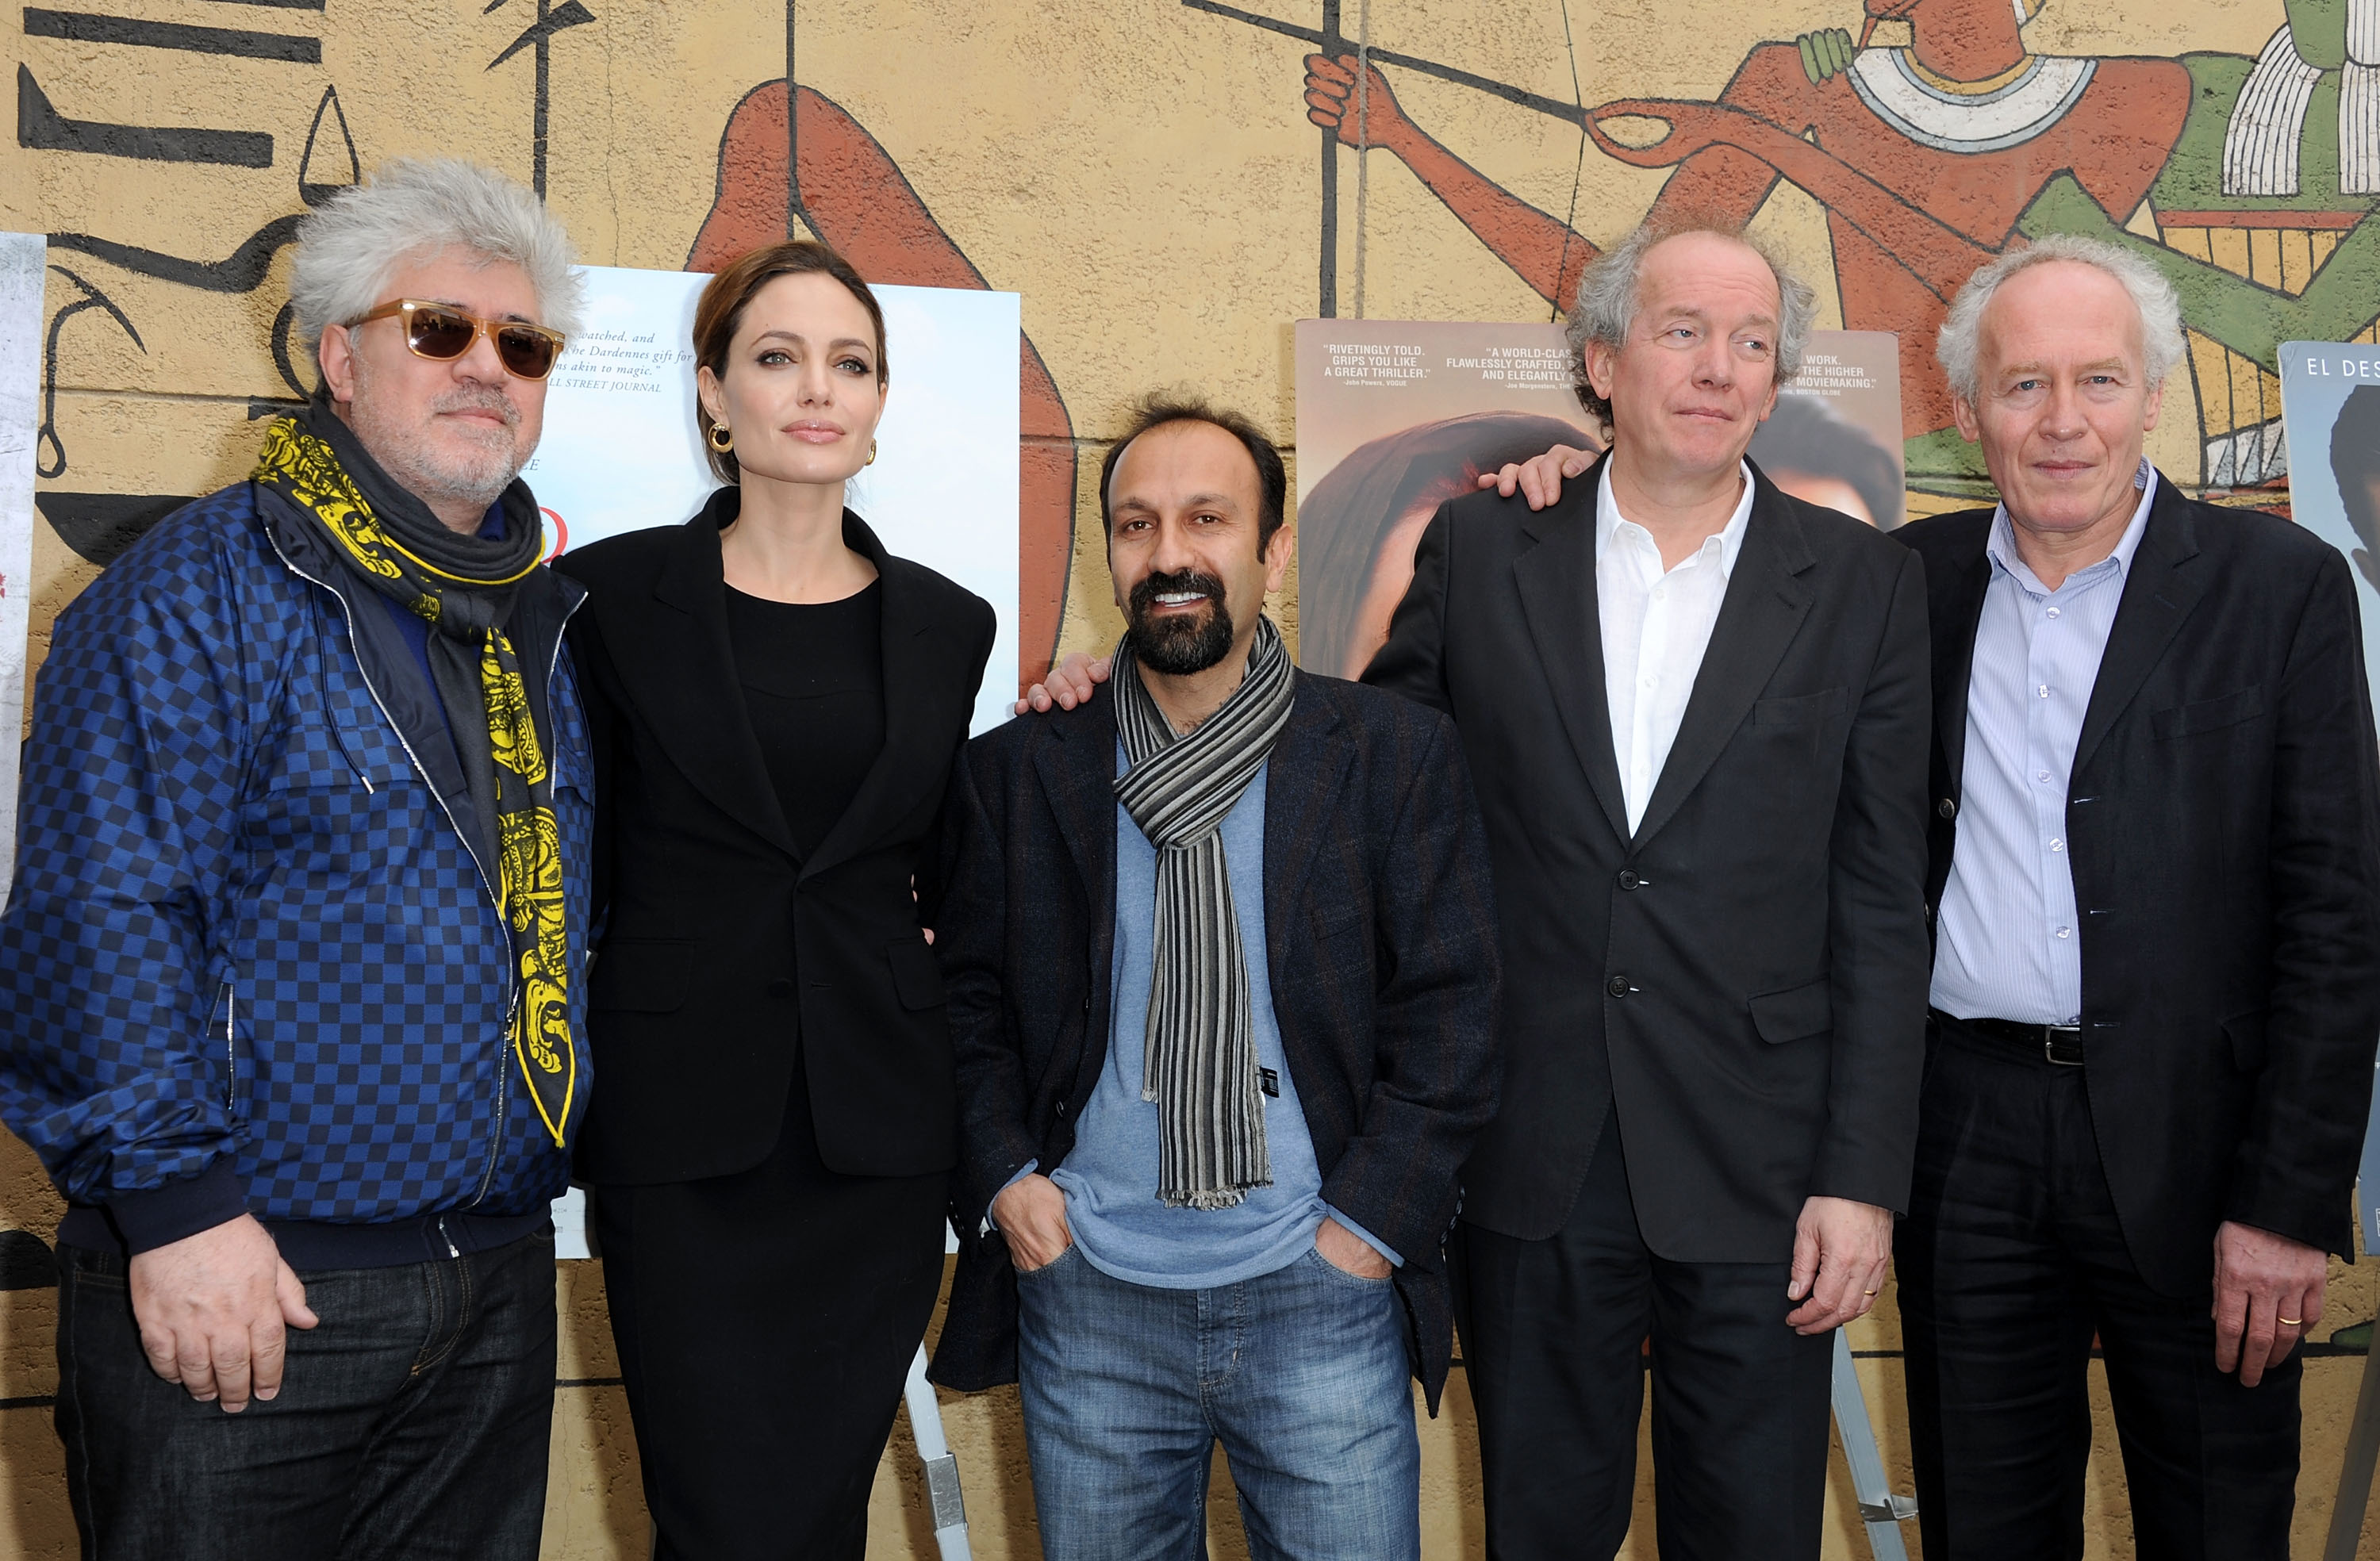 HOLLYWOOD, CA - JANUARY 14: (L-R) Directors Pedro Almodovar, Angelina Jolie, Asghar Farhadi, Luc Dardenne and Jean-Pierre Dardenne arrive at The American Cinematheque's 69th Annual Golden Globe Awards Foreign-Language Nominee Event at the Egyptian Theatre on January 14, 2012 in Hollywood, California. (Photo by Valerie Macon/Getty Images)